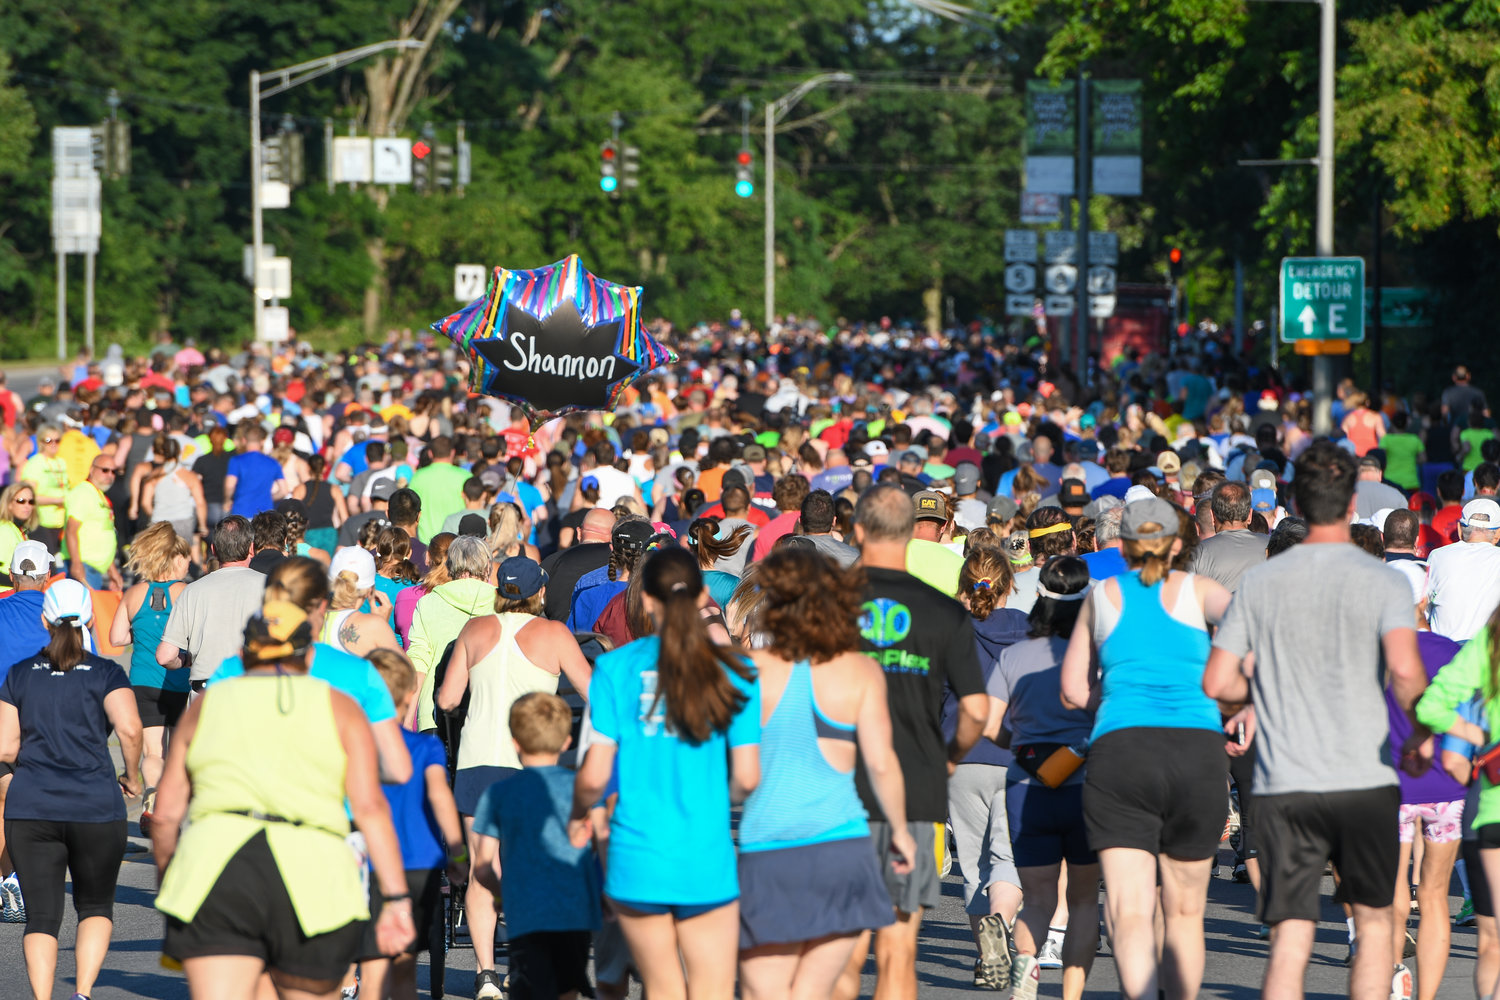 Over 2,000 people signed up to run in the 2022 Boilermaker 5K on Sunday.